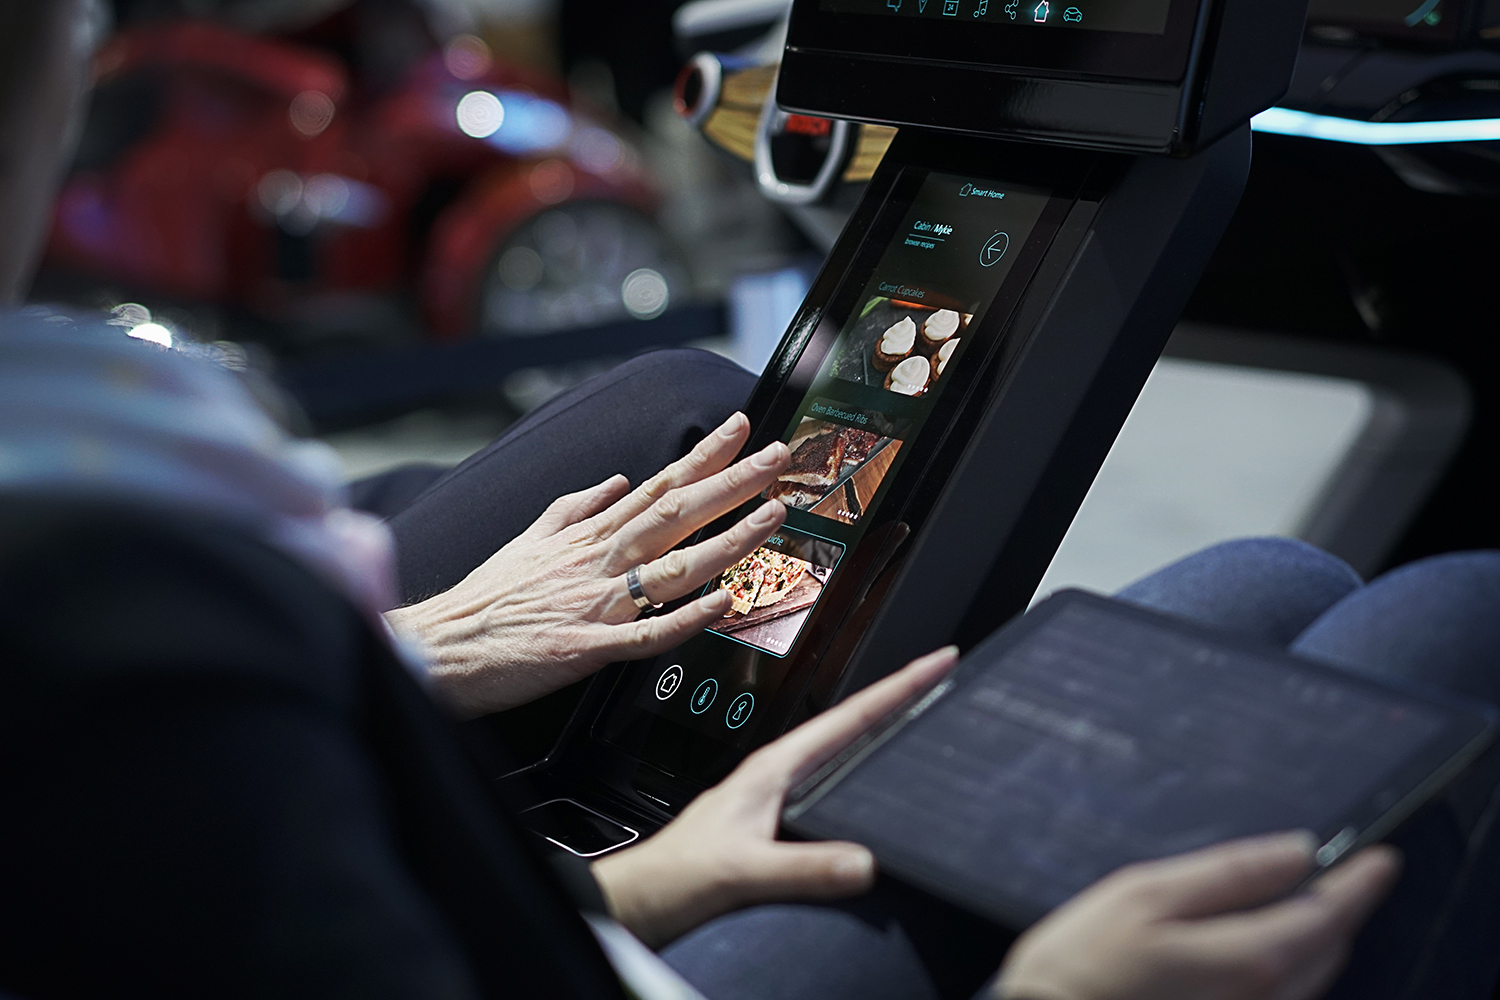 Digital displays and voice-controlled assistants are revolutionizing driving